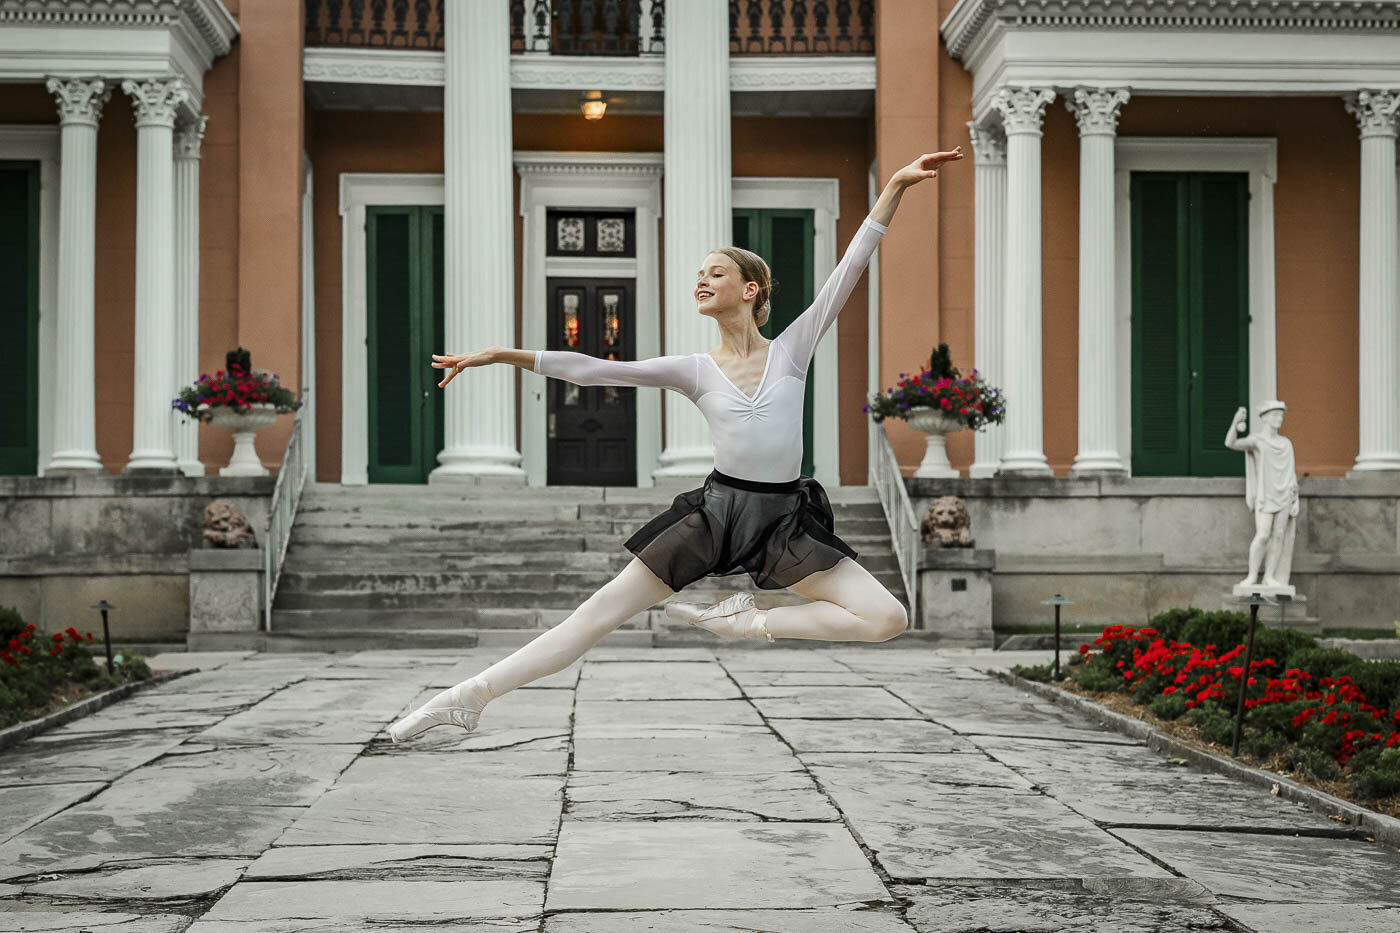 Girl in ballet attire elegantly leaping in front of a building